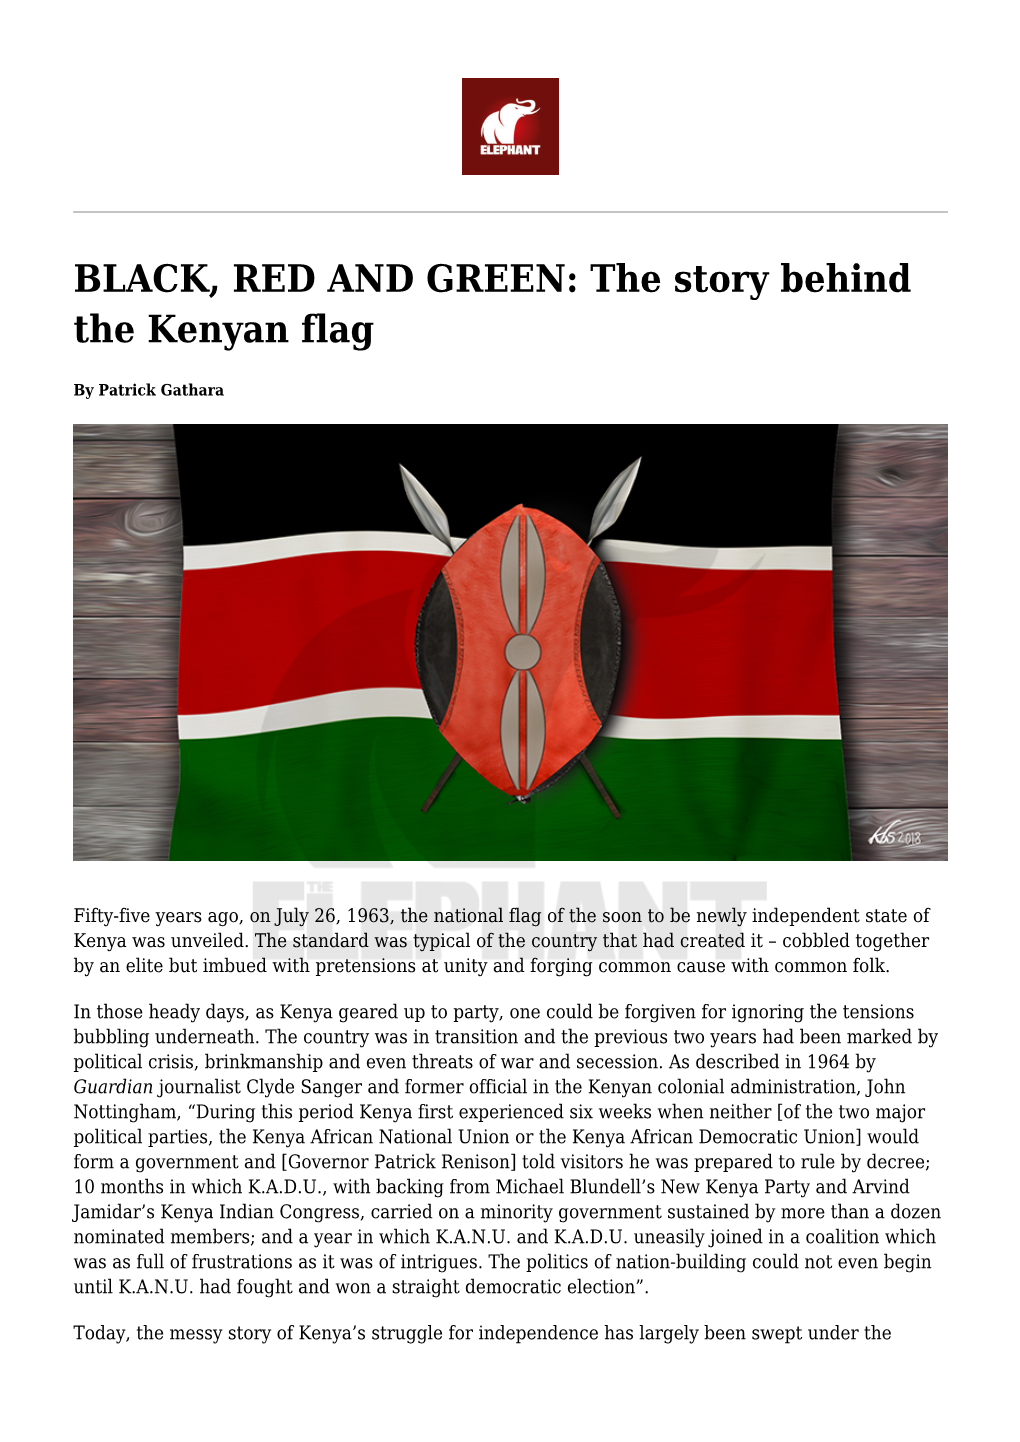 BLACK, RED and GREEN: the Story Behind the Kenyan Flag